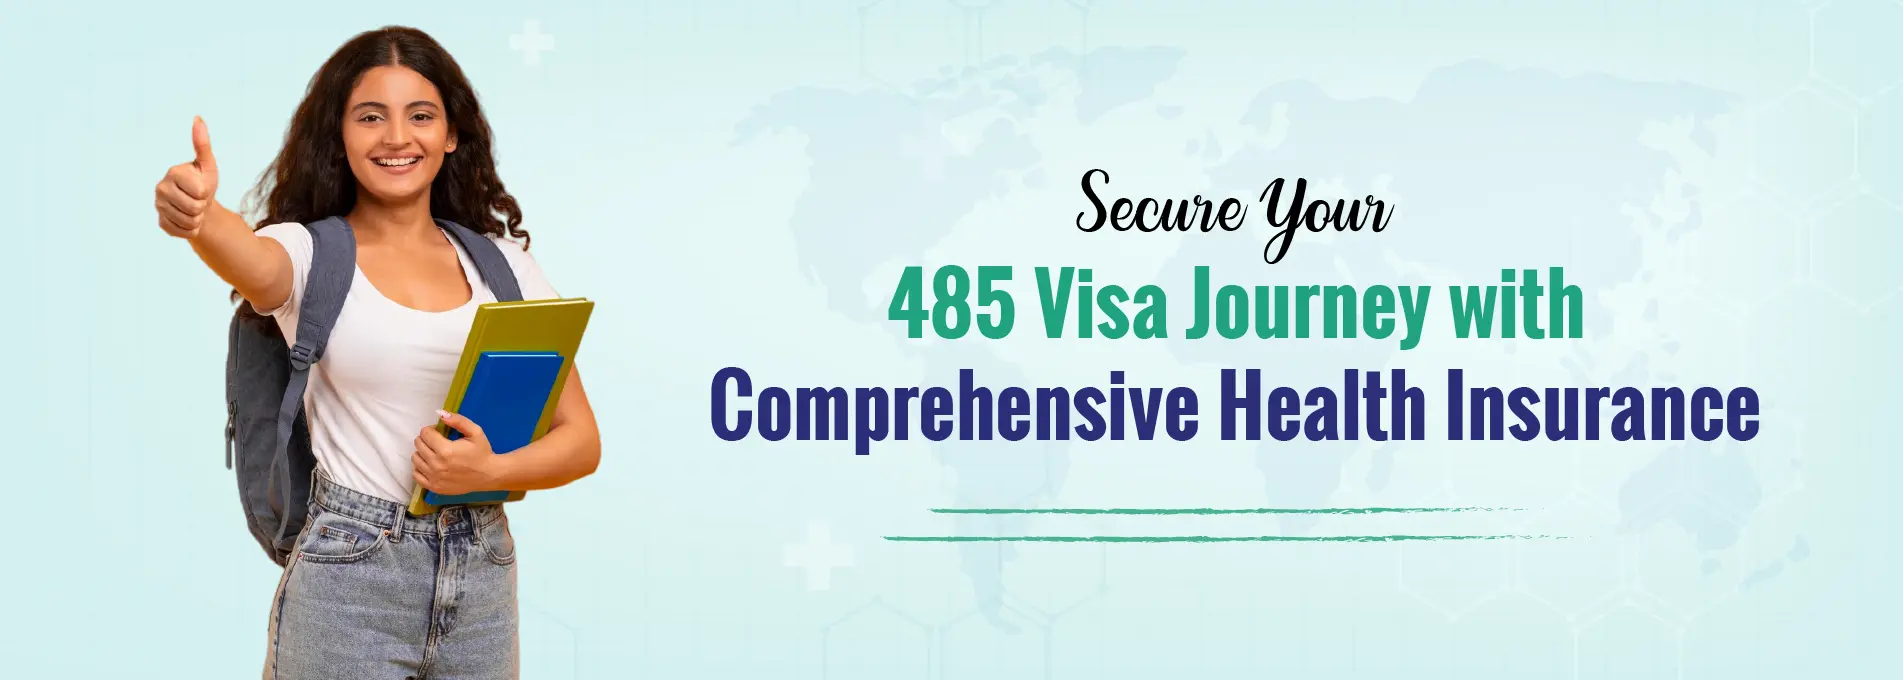 Secure Your 485 Visa Journey with Comprehensive Health Insurance